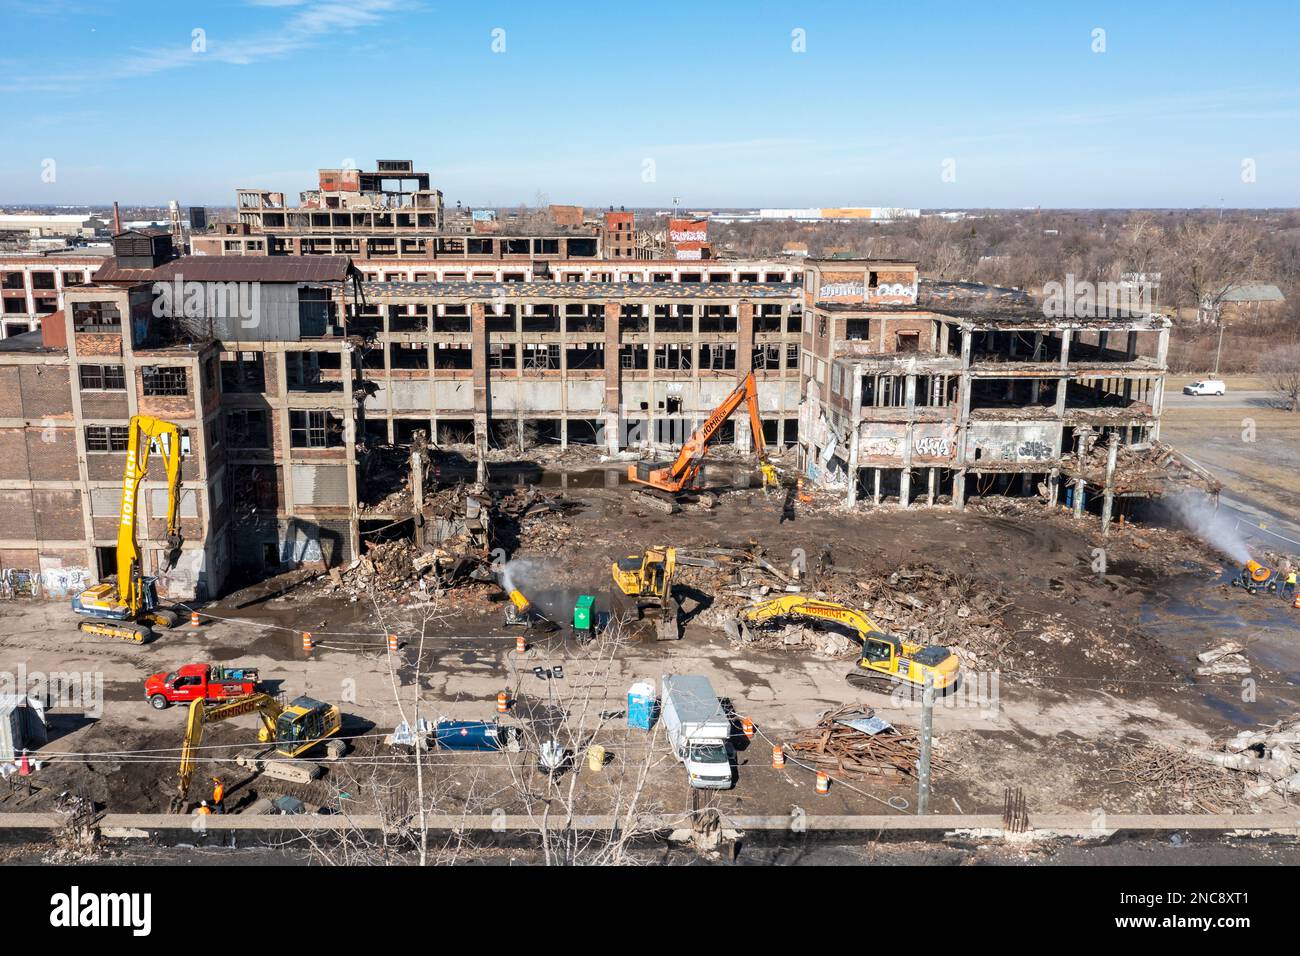 Detroit, Michigan - Demolition of a part of the abandoned Packard auto manufacturing plant. Opened in 1903, the 3.5 million square foot plant employed Stock Photo